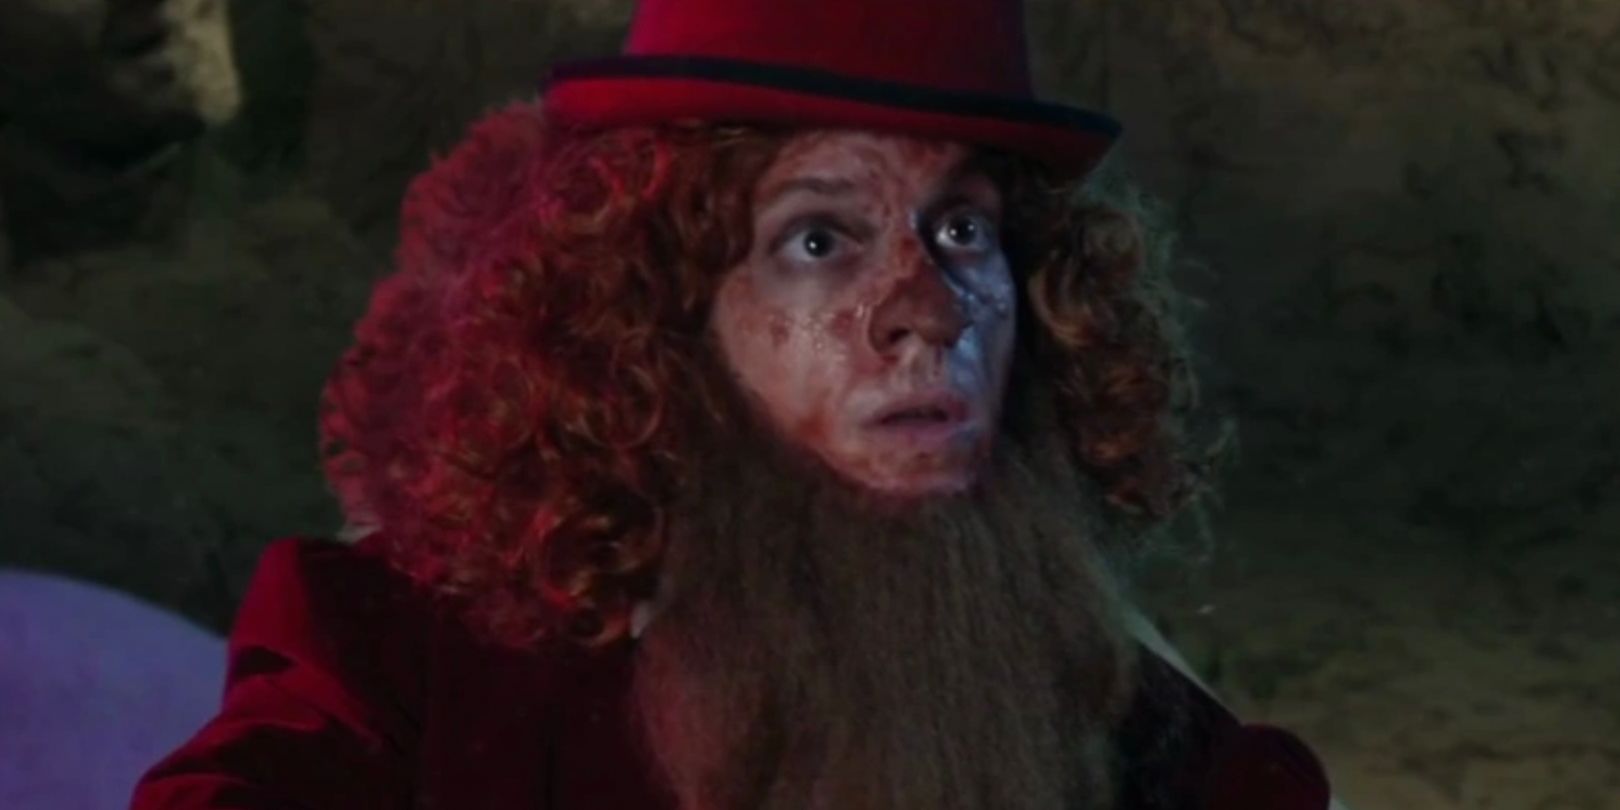 A man with a beard and a red hat in Unlucky Charms